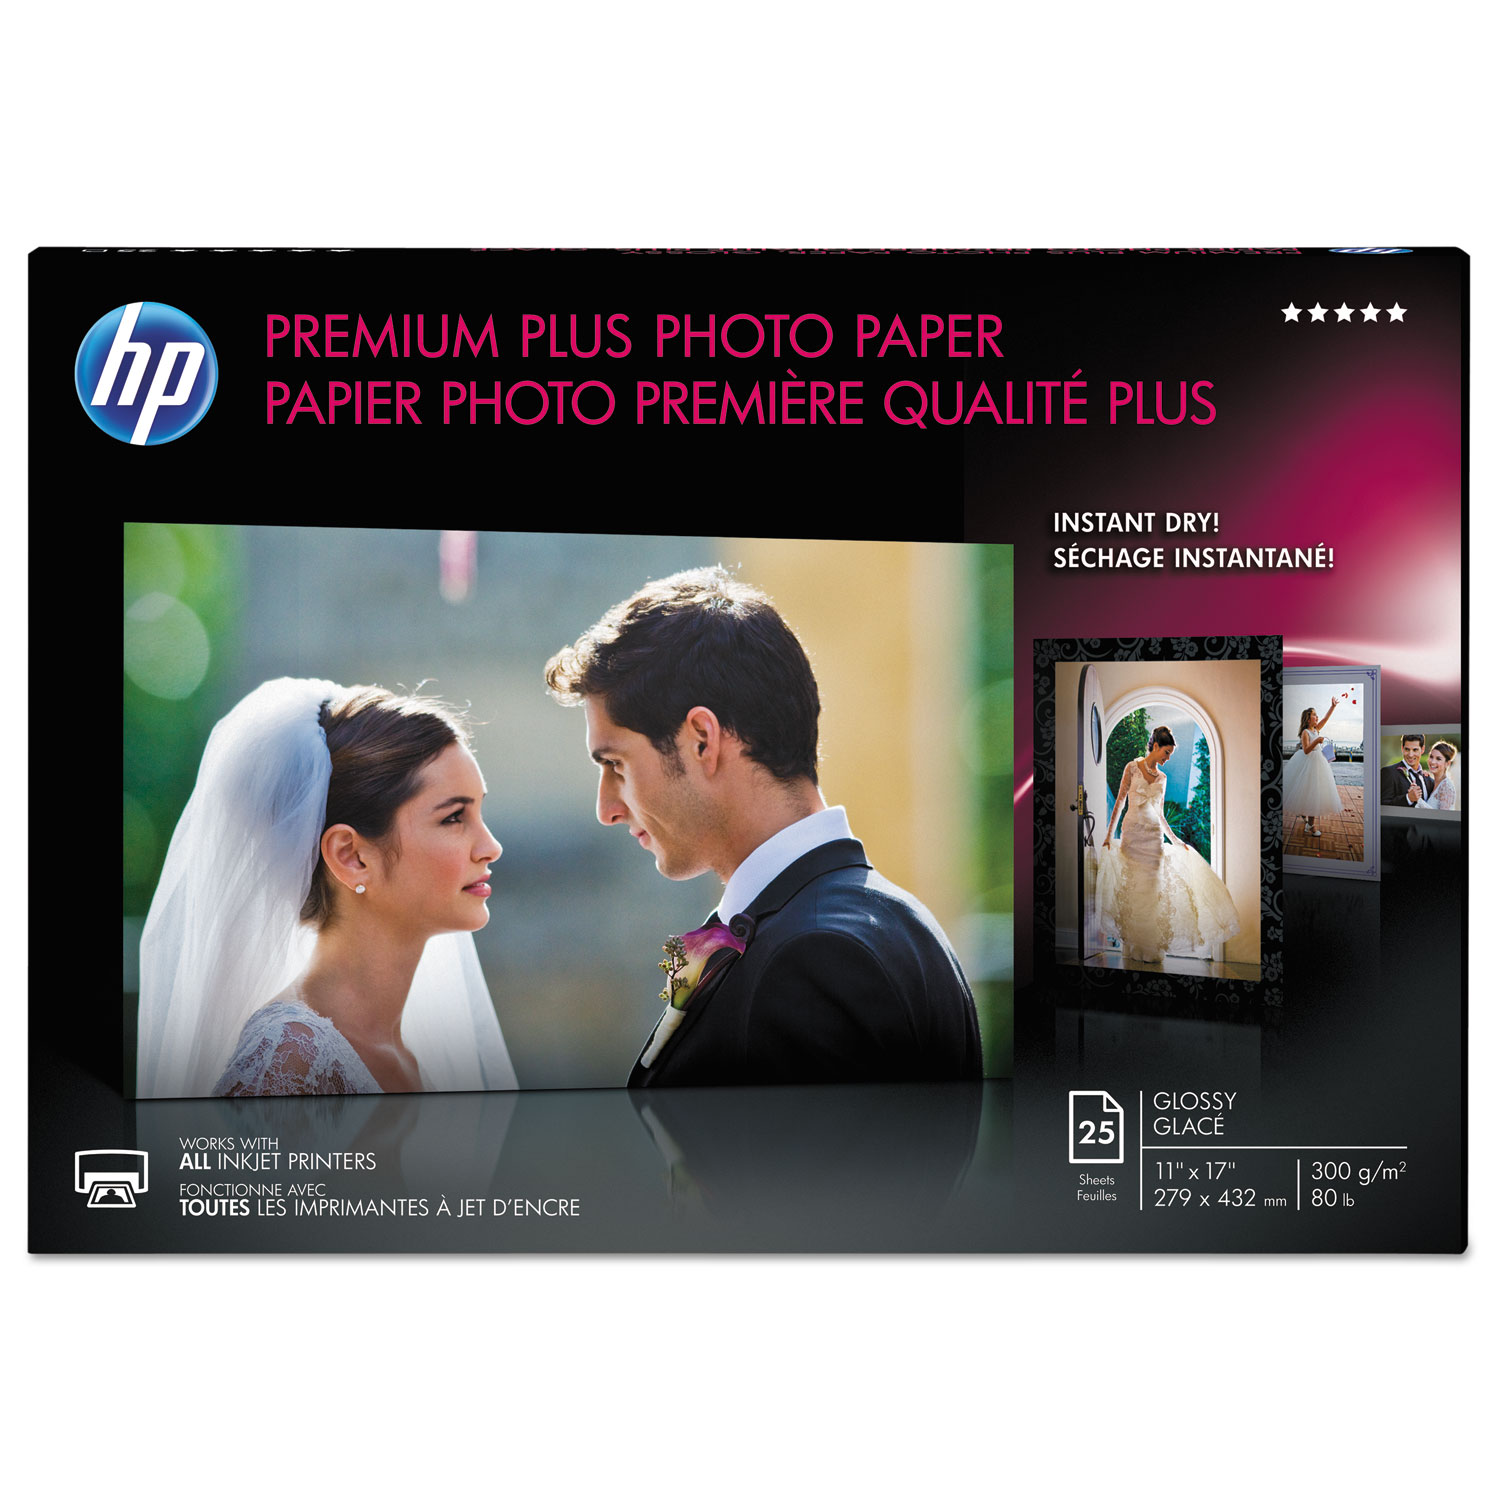 Premium Plus Photo Paper, 75 lbs., Glossy, 11 x 17, 25 Sheets/Pack